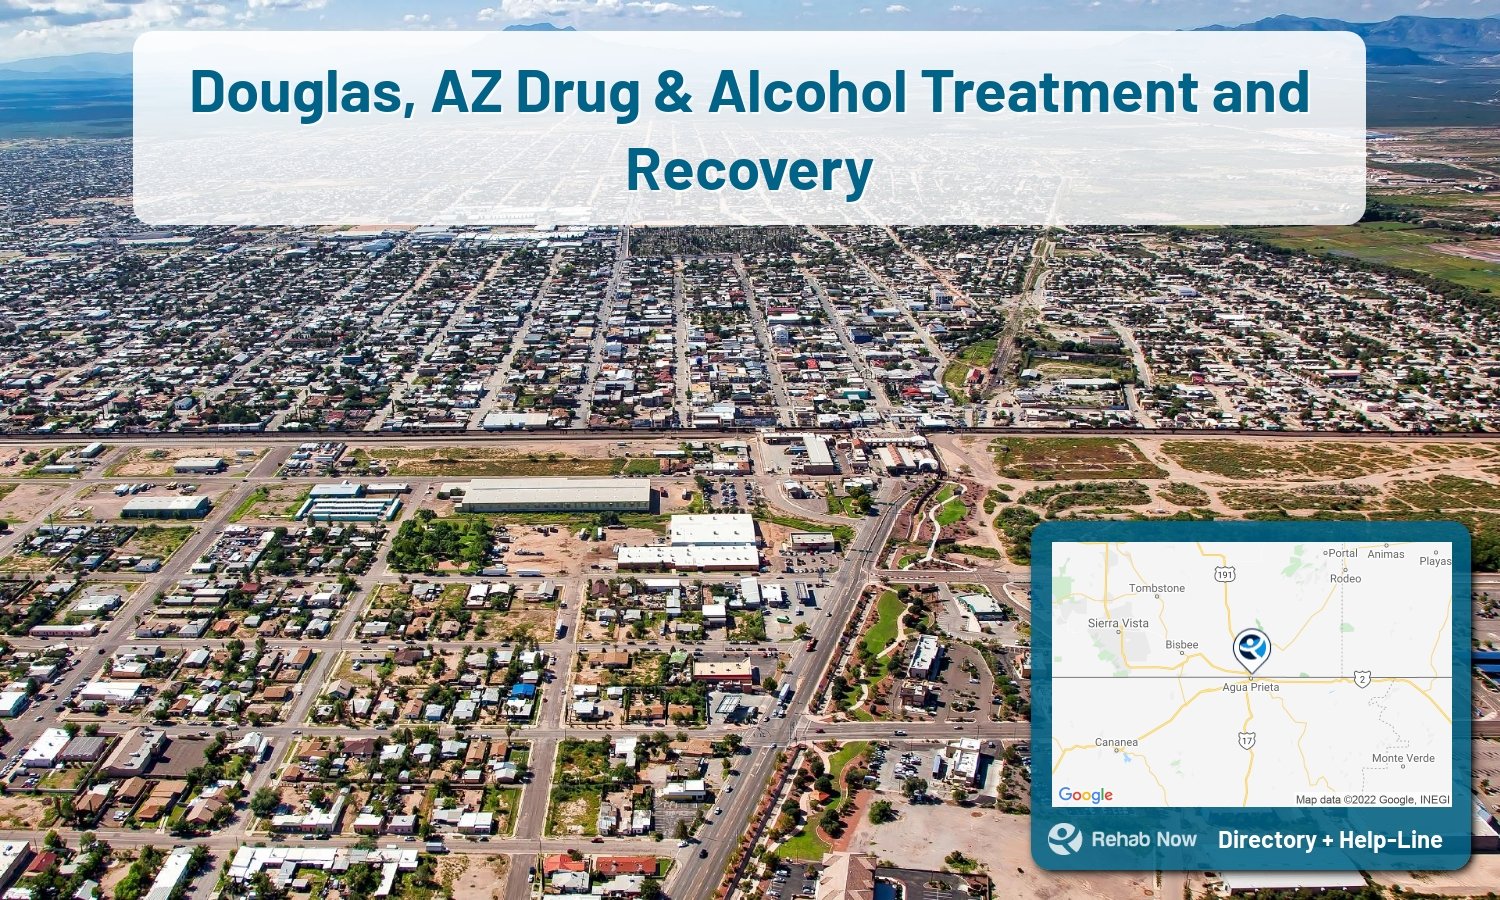 List of alcohol and drug treatment centers near you in Douglas, Arizona. Research certifications, programs, methods, pricing, and more.